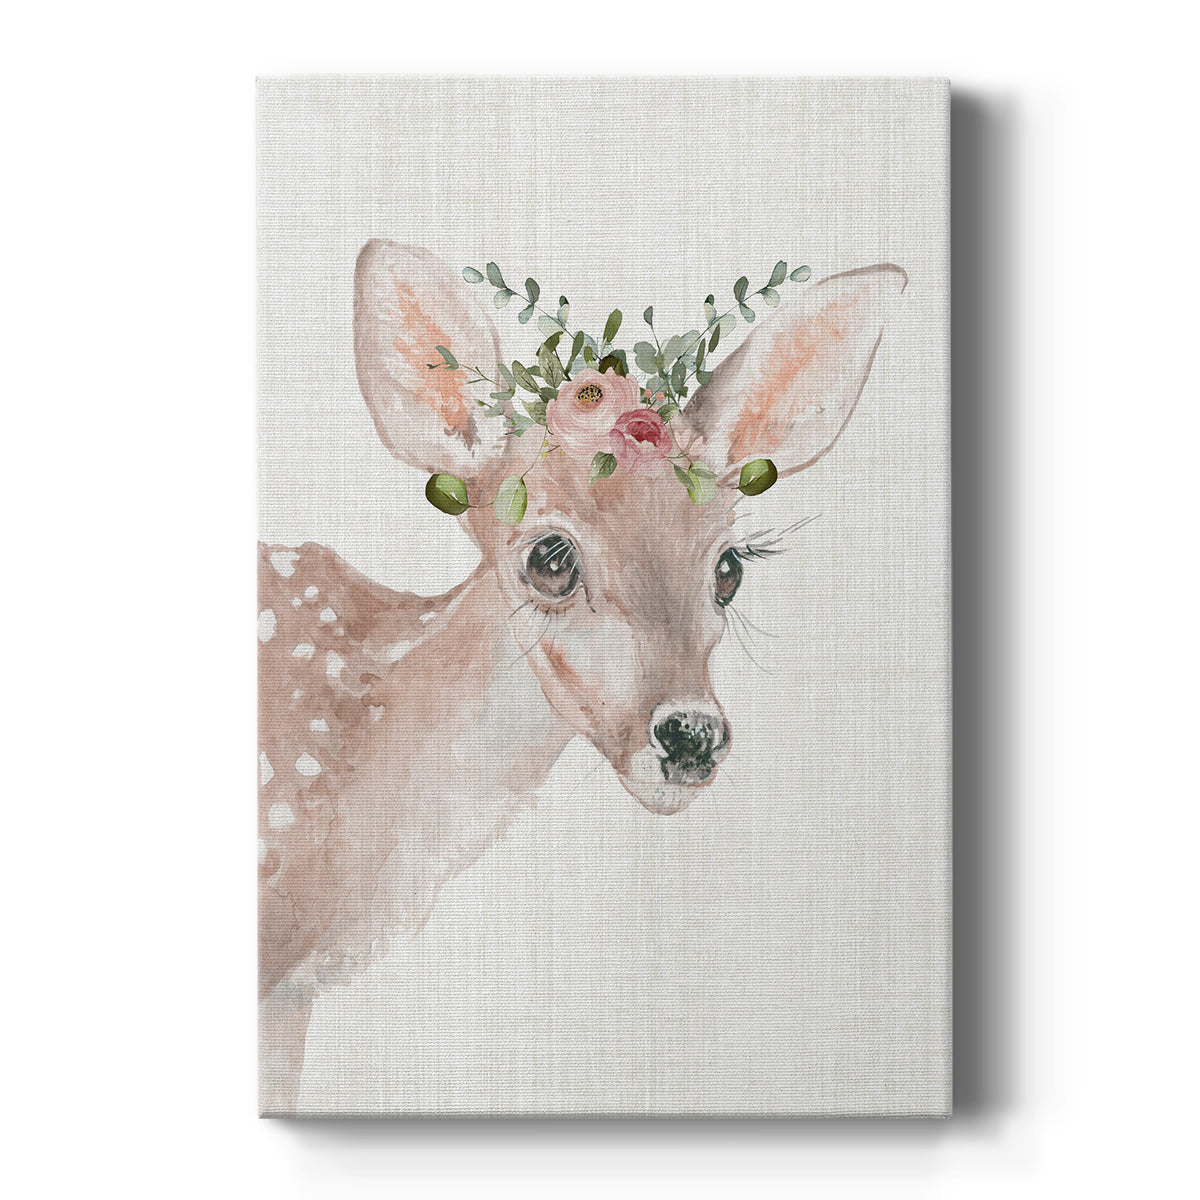 Dressy Fawn Premium Gallery Wrapped Canvas - Ready to Hang